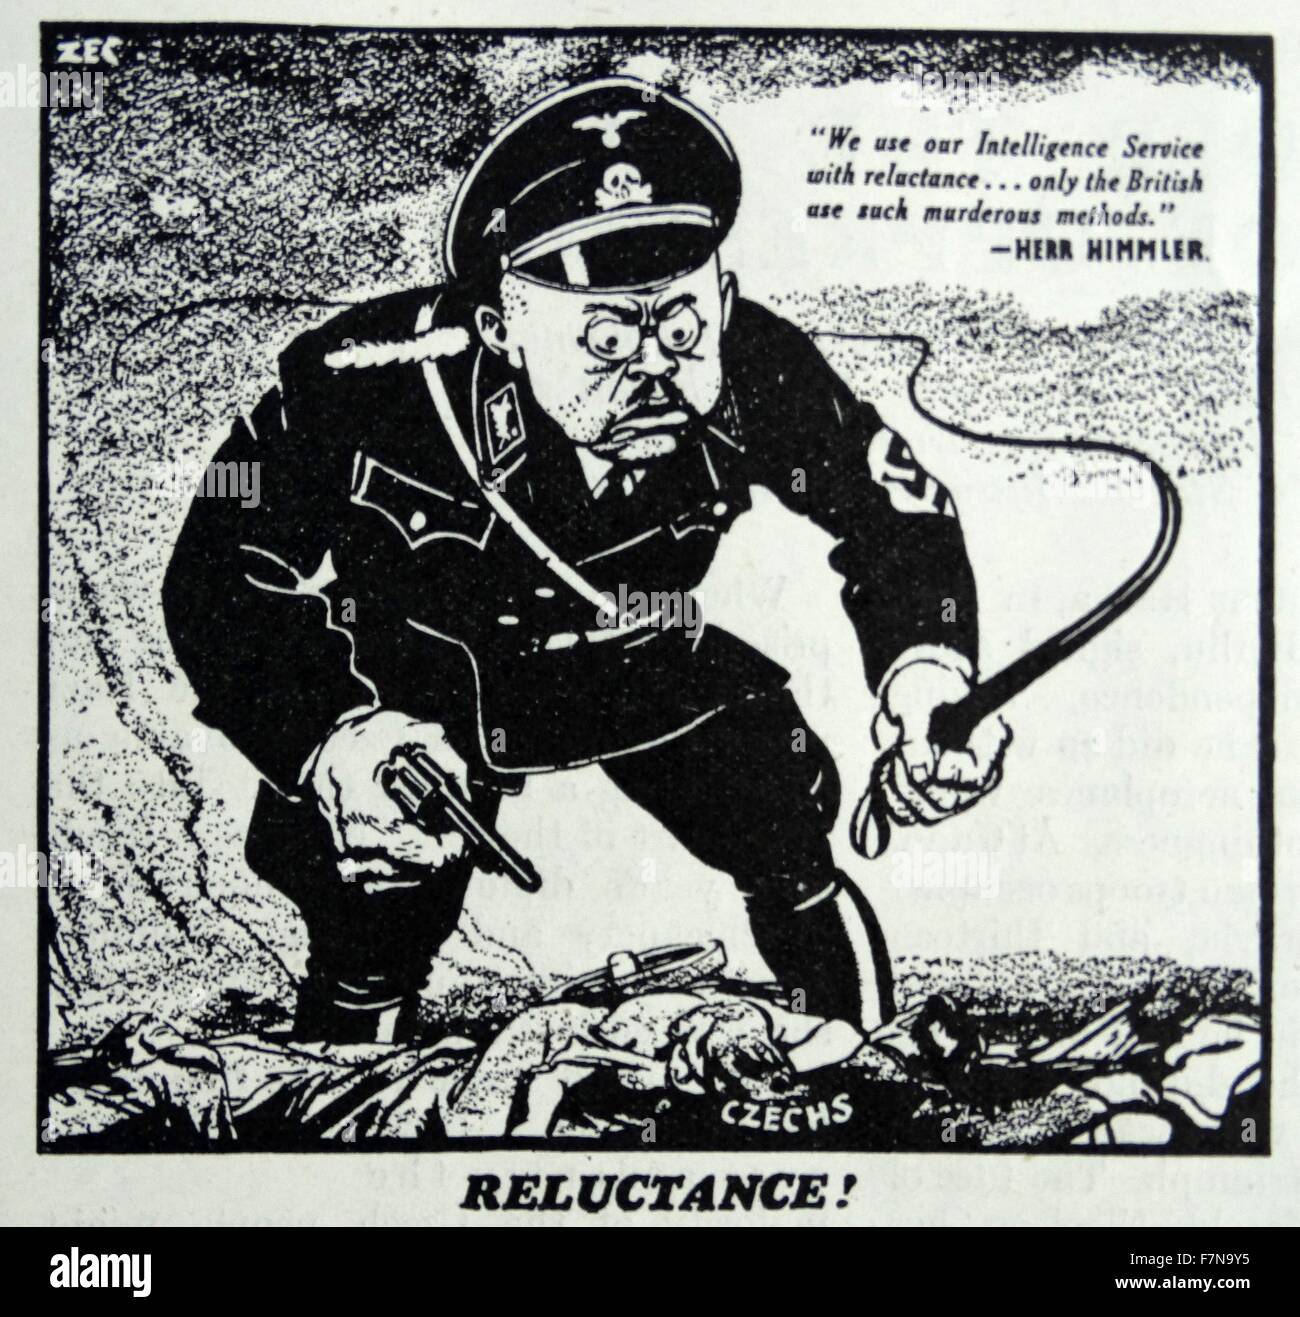 Illustration of Heinrich Himmler (1900-1945) was Reichsführer of the Schutzstaffel, a military commander, and a leading member of the Nazi Party of Nazi Germany. This political satire illustration depicts Himmler with a whip saying 'We use our Intelligence Service with reluctance... Only the British use such murderous methods'. Dated 1940 Stock Photo